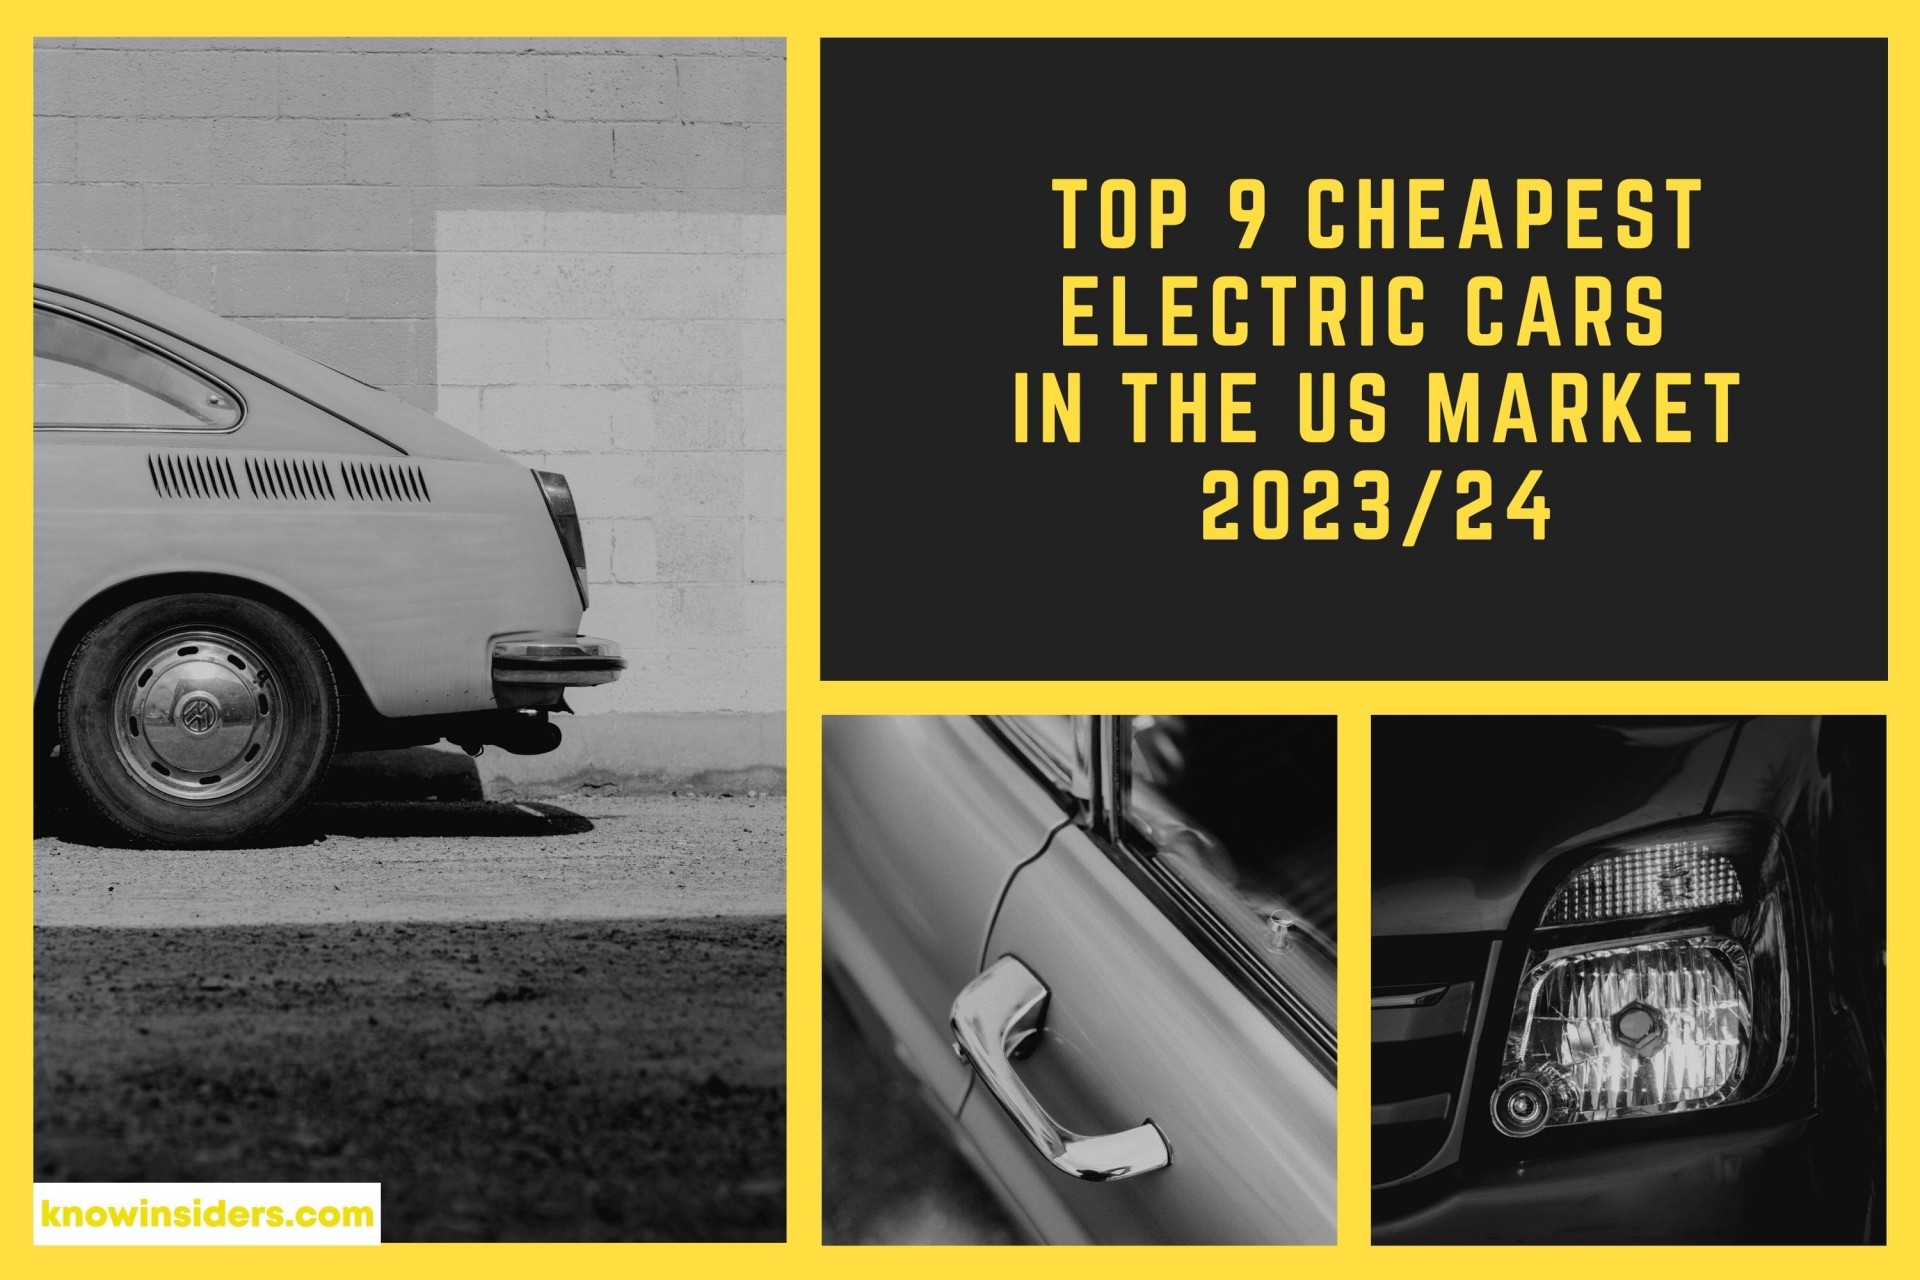 Top 9 Cheapest & Best Electric Vehicles In The US of 2023/2024